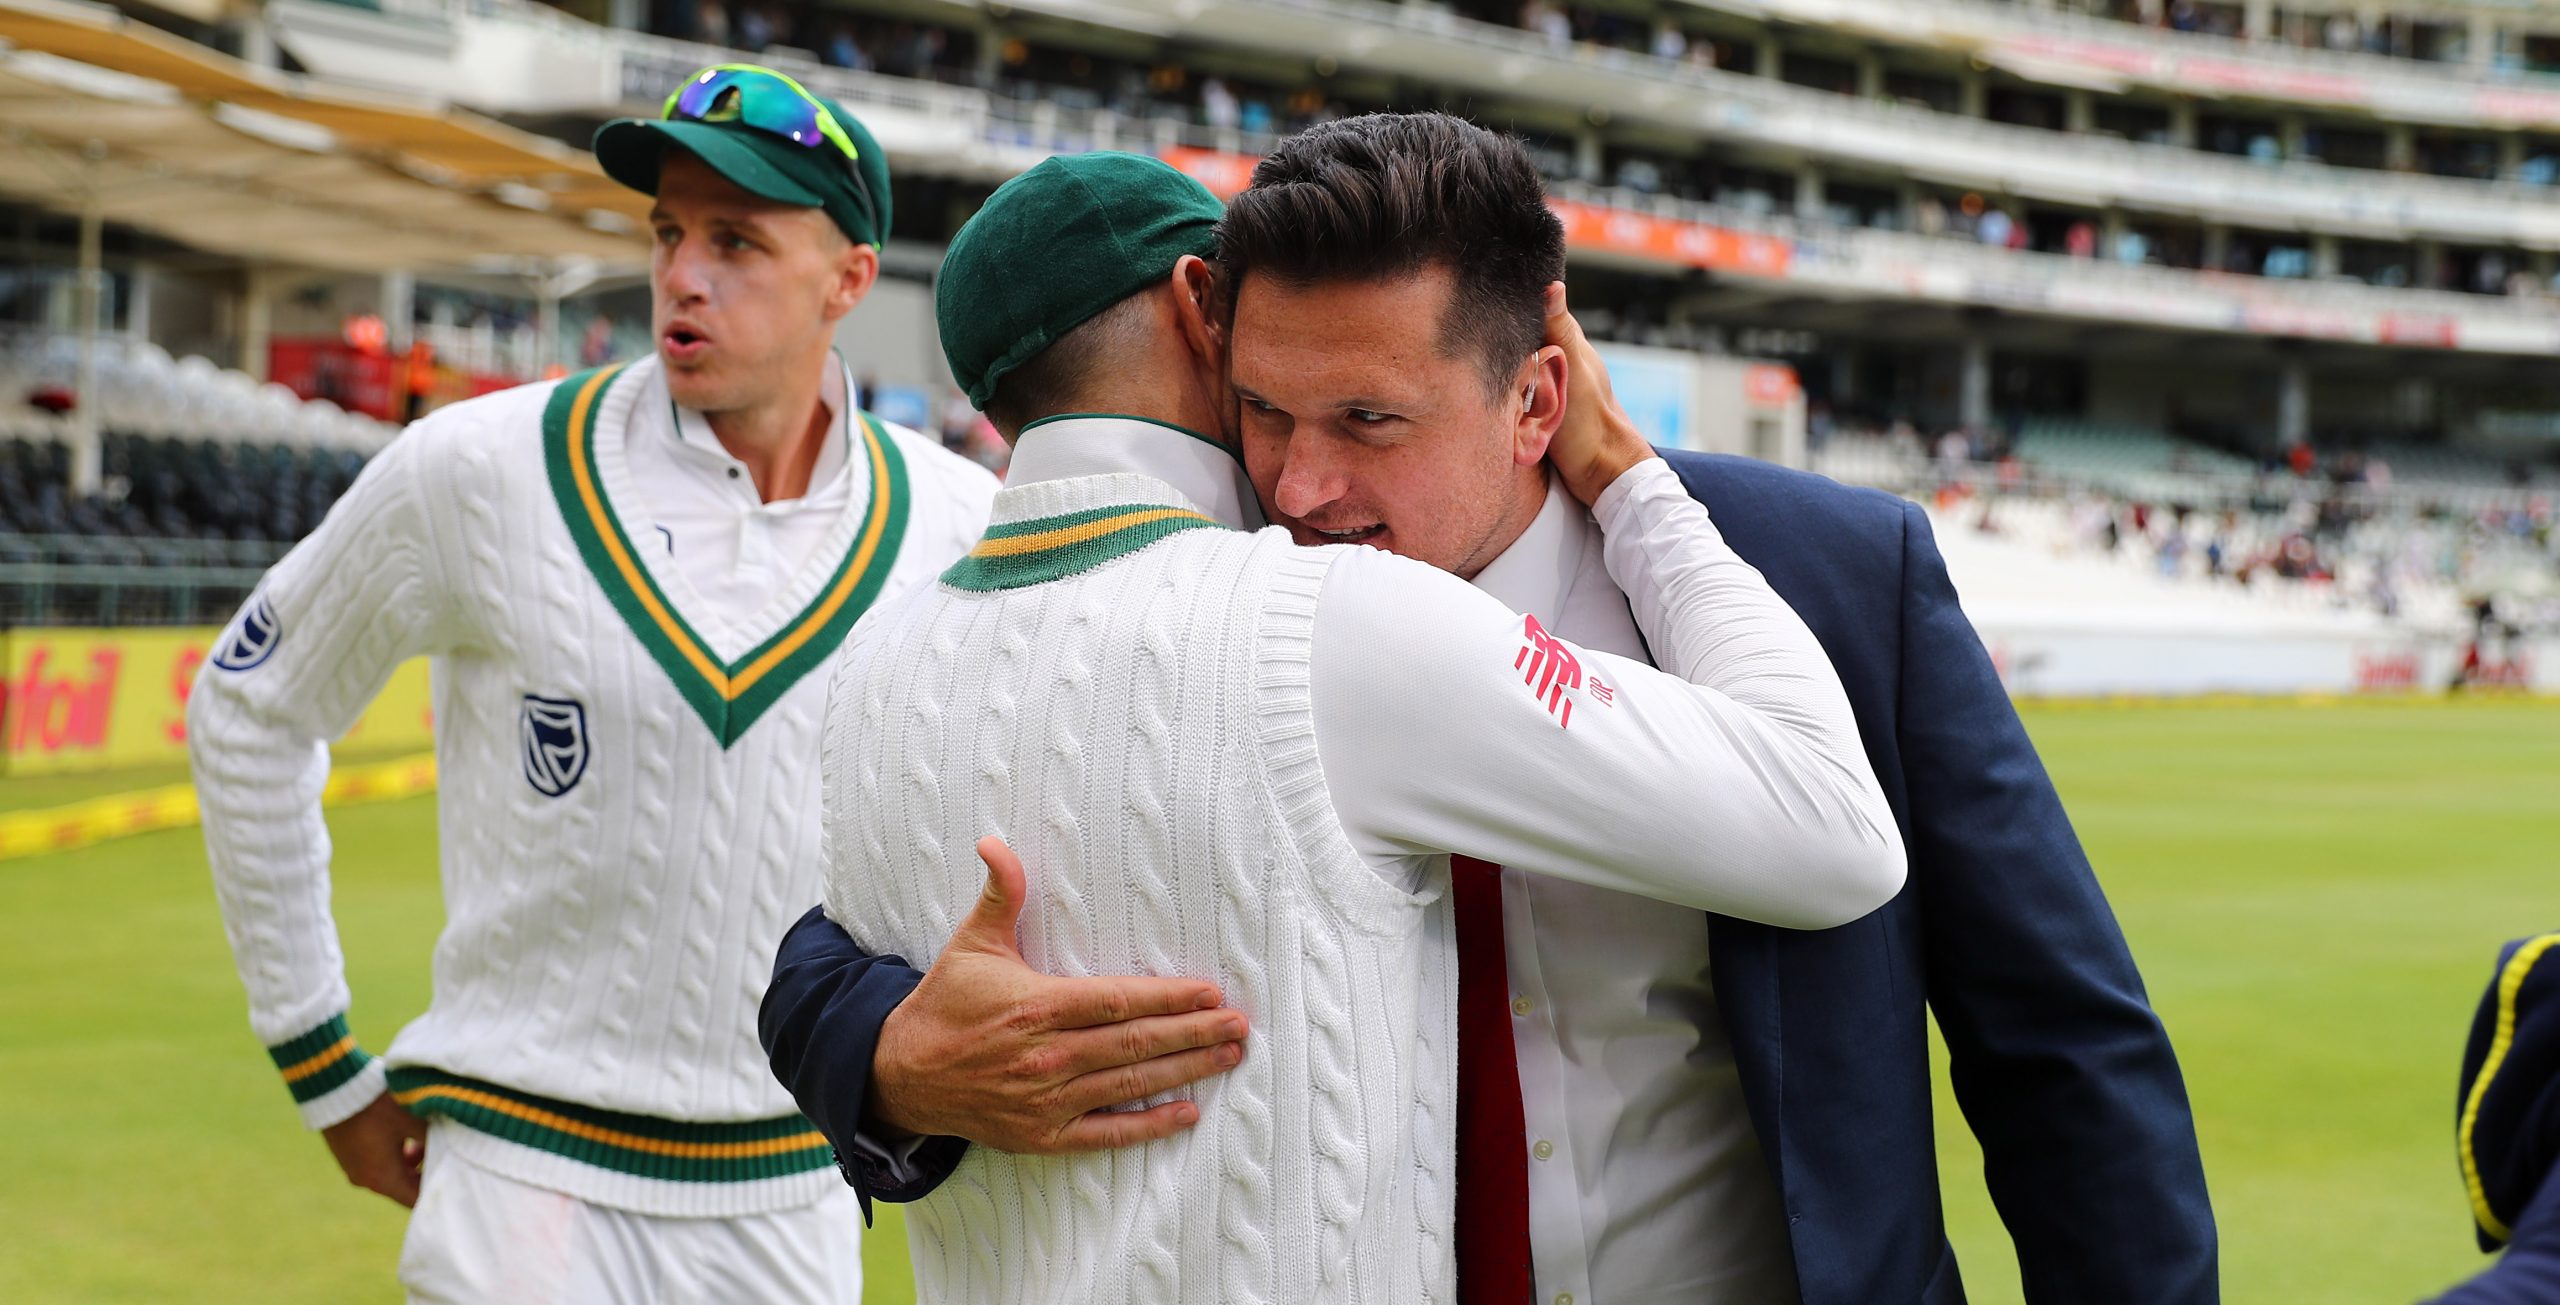 “I’m looking forward to getting stuck into the role” – Graeme Smith